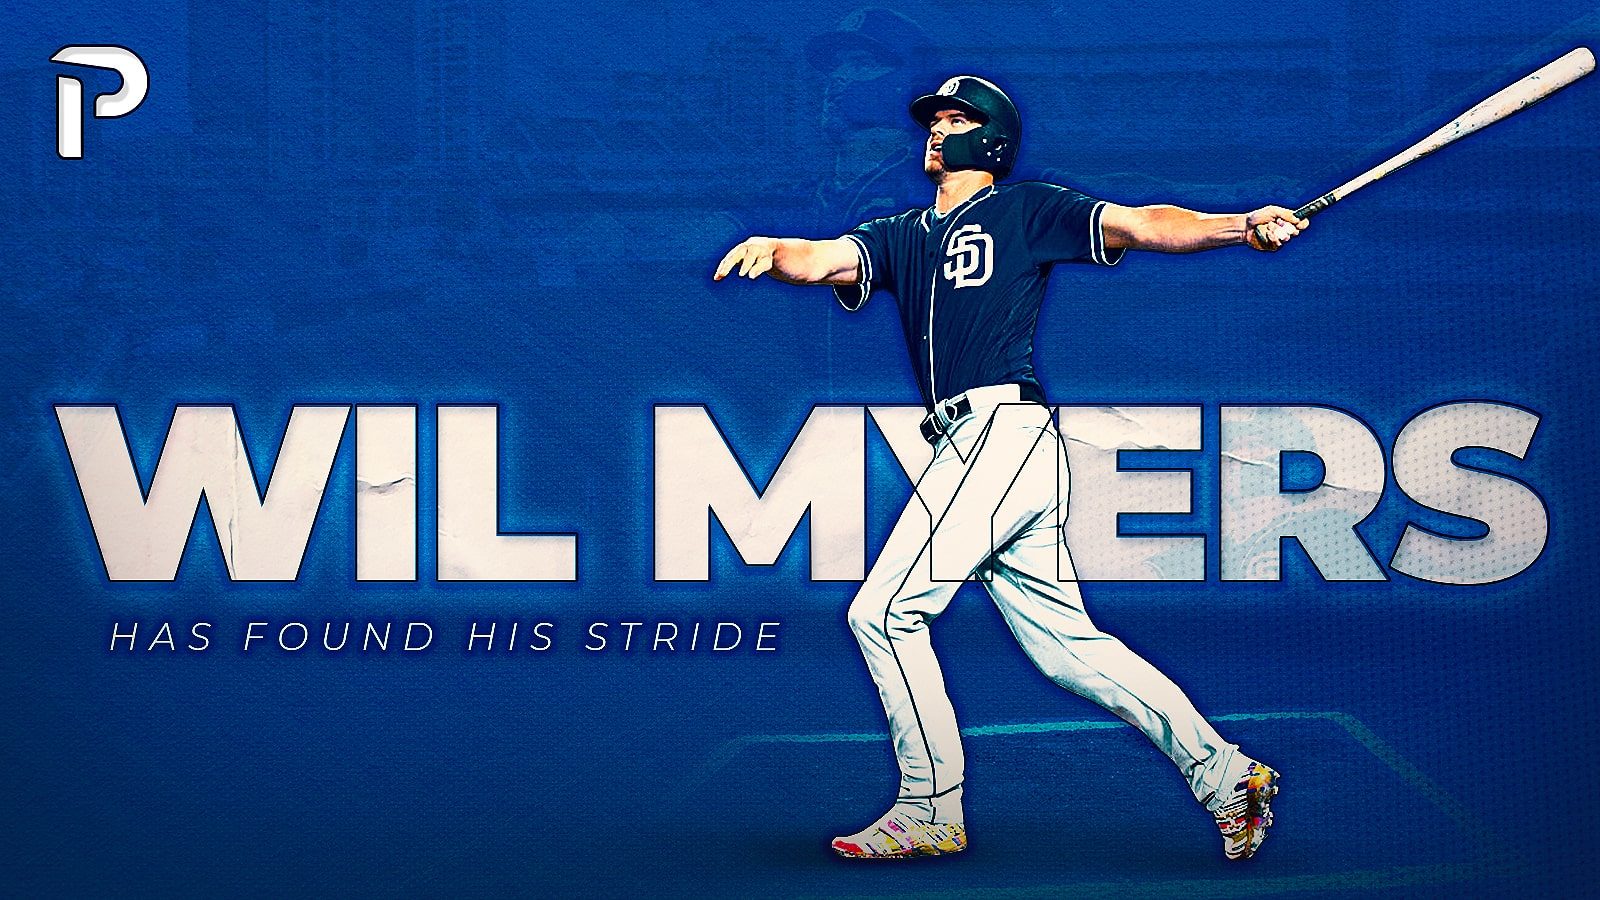 Why Wil Myers Is Hyped as MLB's Next Great Hitting Stud